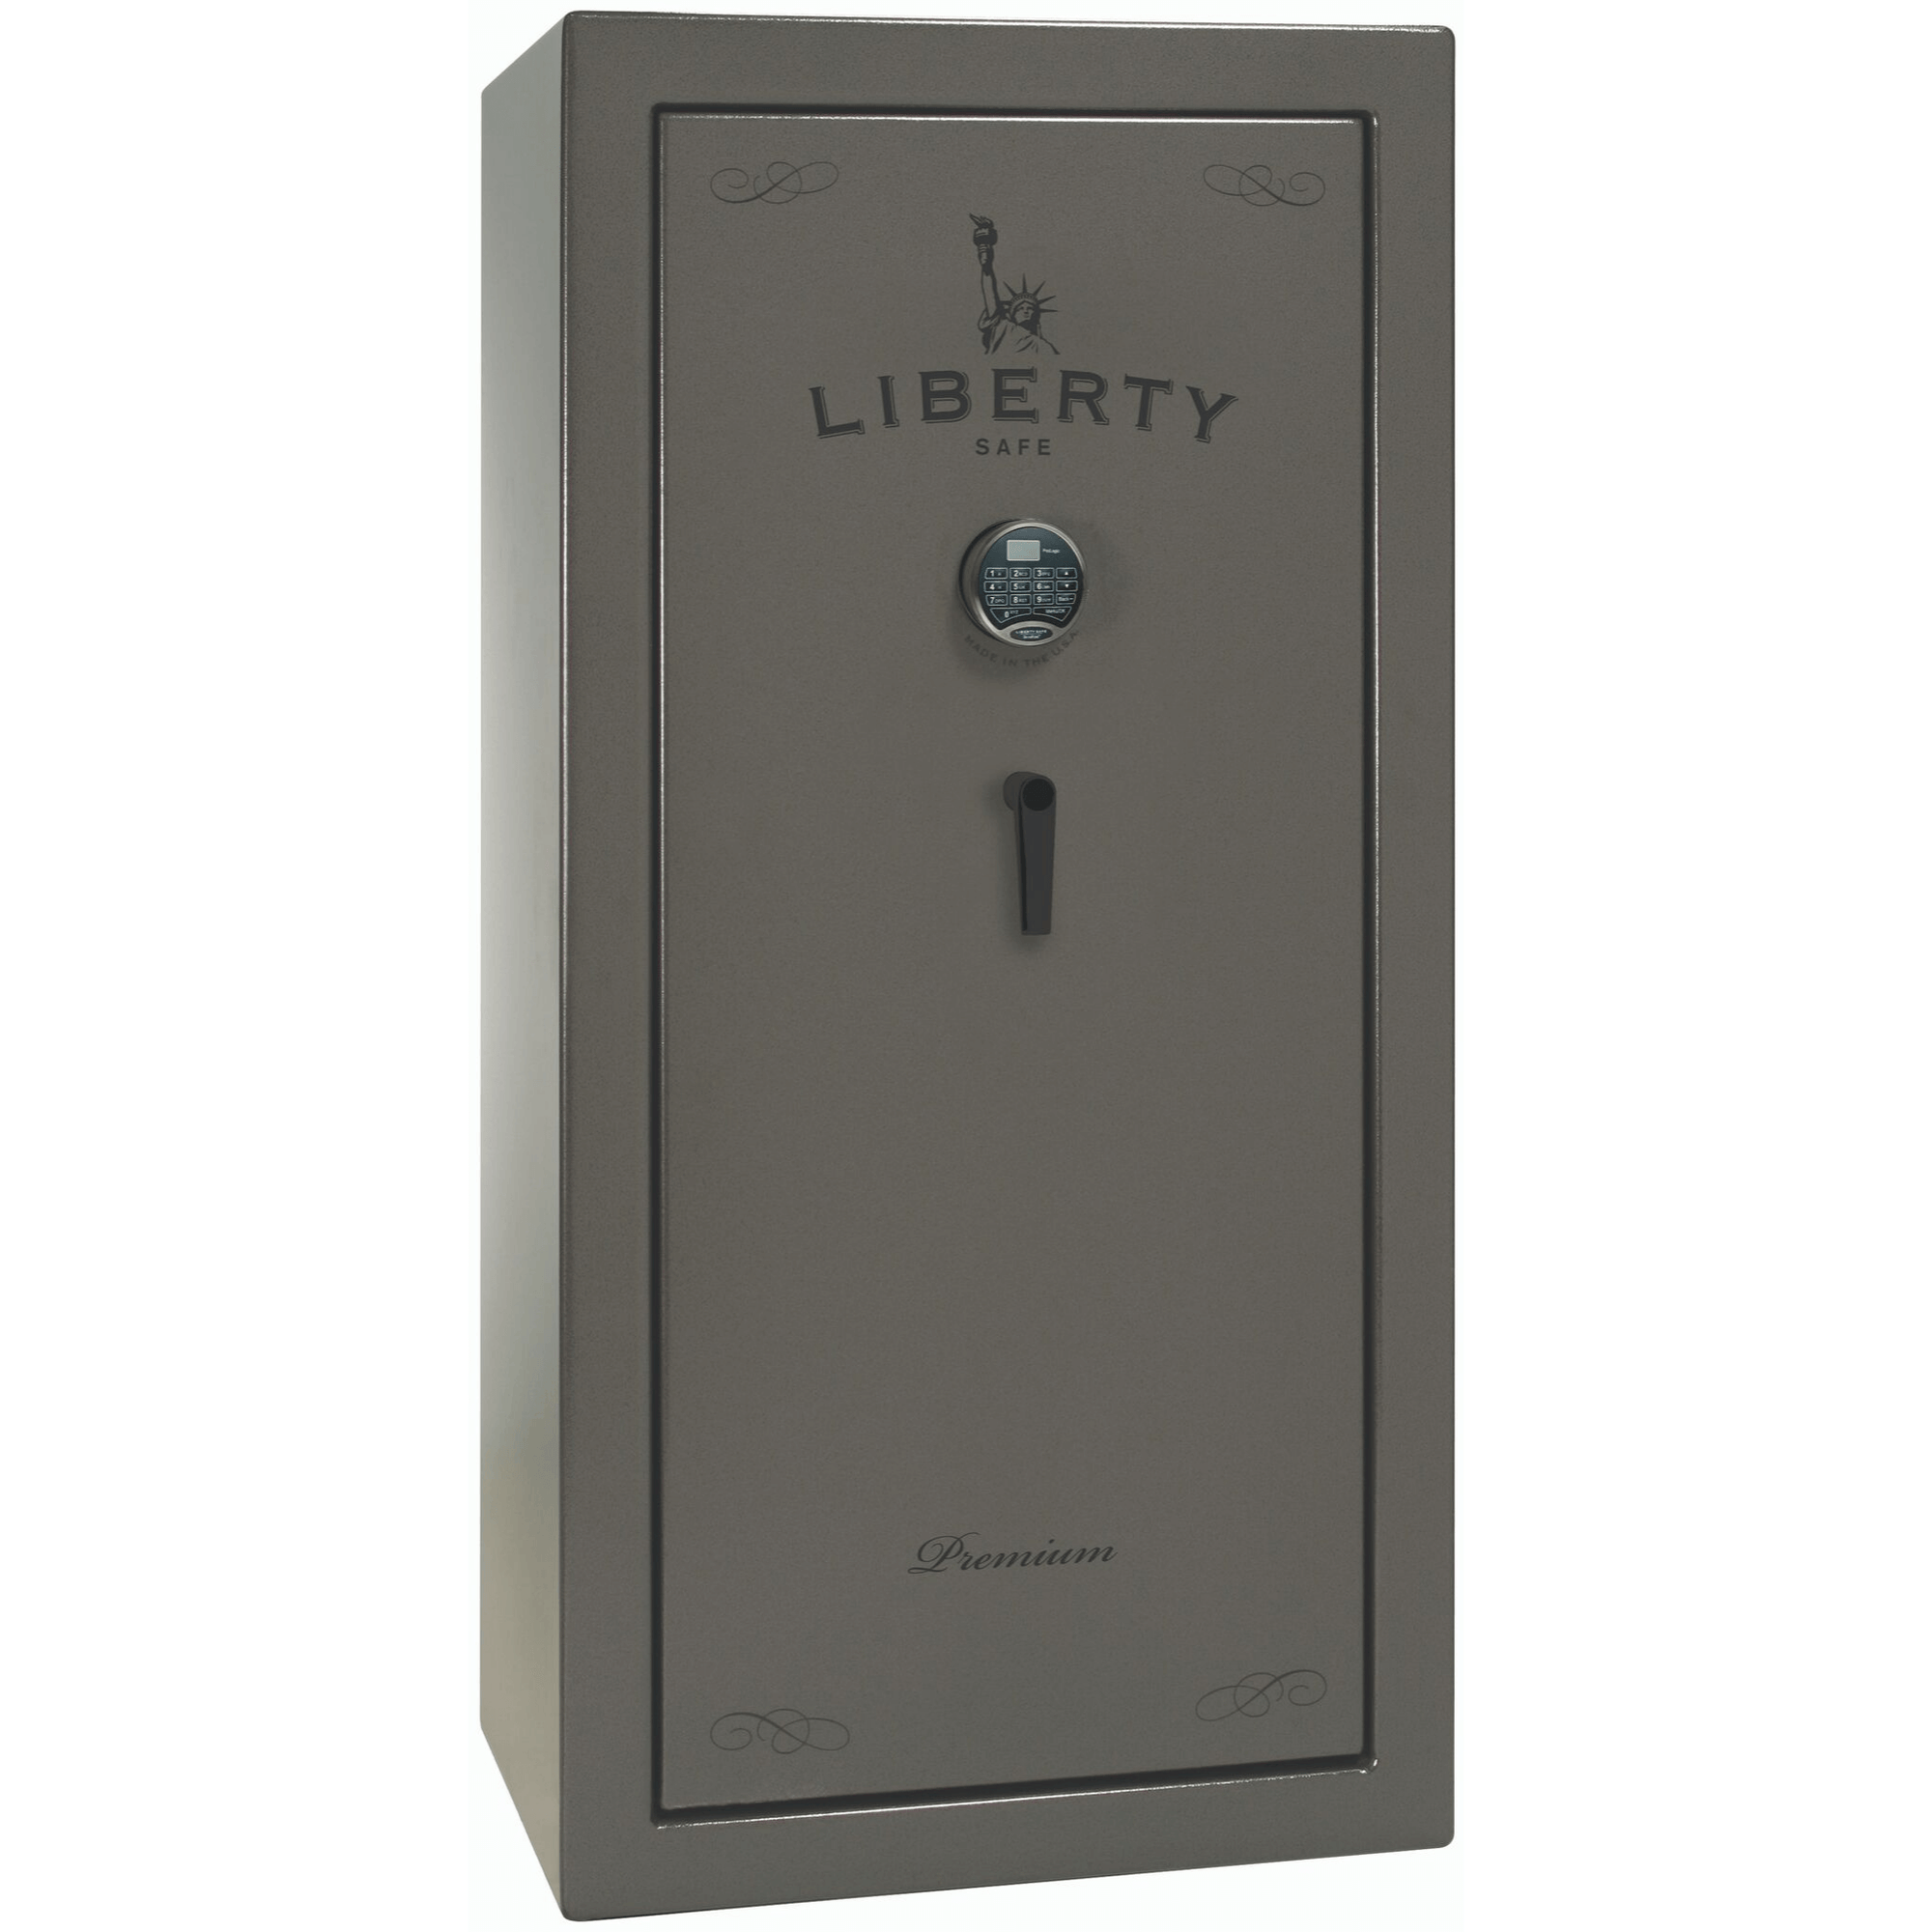 Premium | 20 | Level 2 Security | 75 Minute Fire Protection | Gray | Black Electronic Lock | 60.5"(H) x 28"(W) x 22"(D)